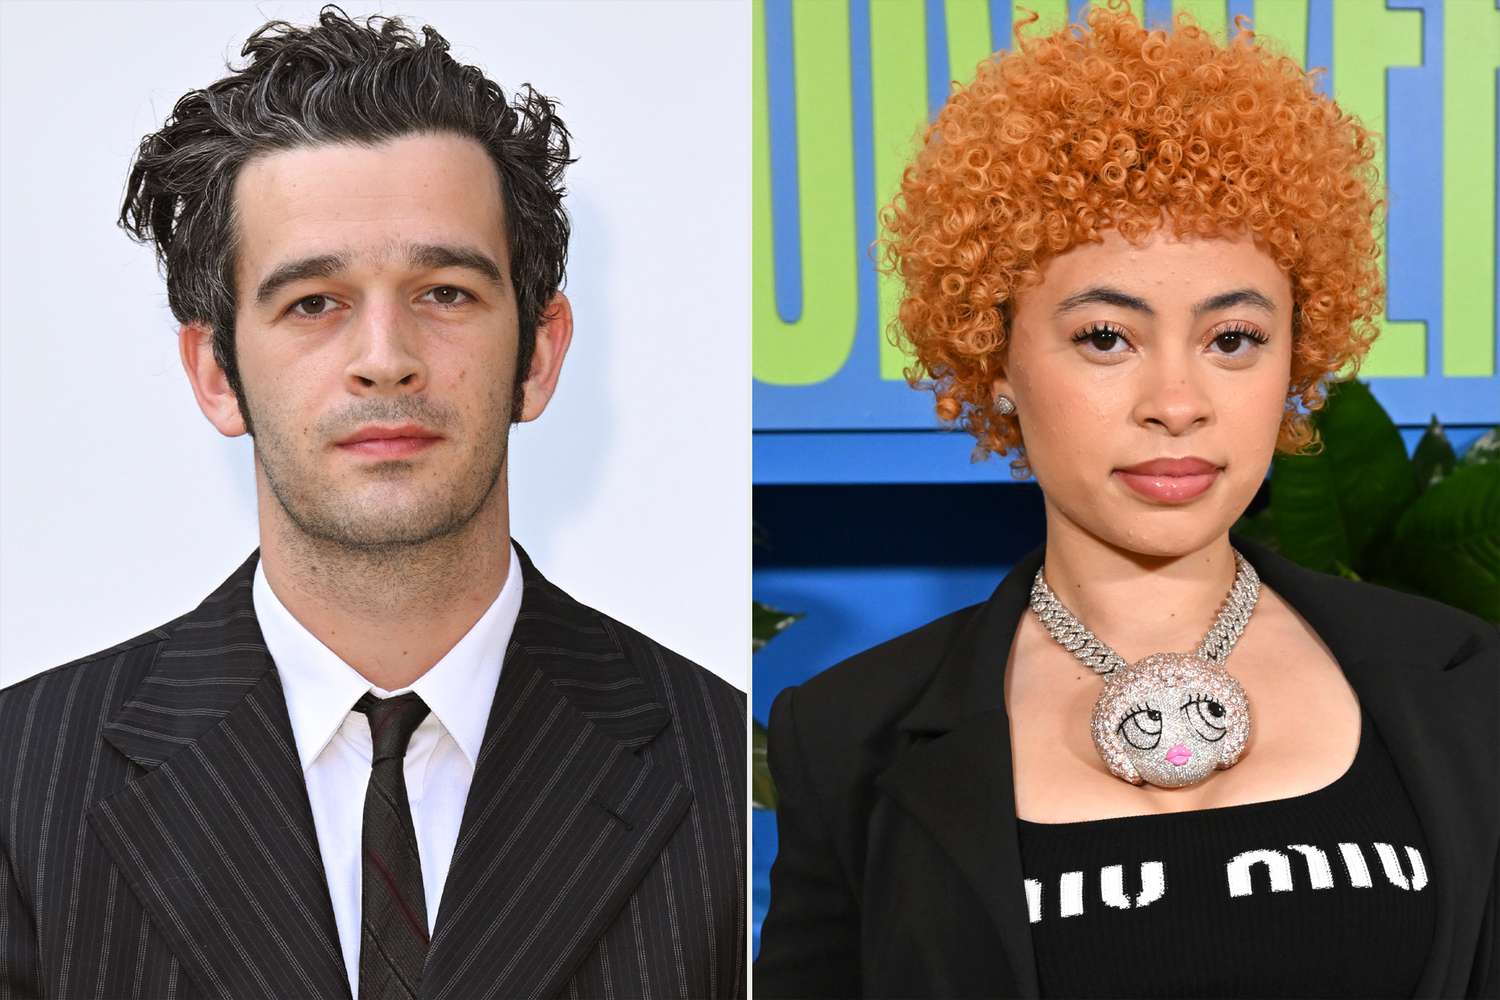 Ice Spice says Matty Healy has apologized to her for controversial podcast remarks: 'We're good'